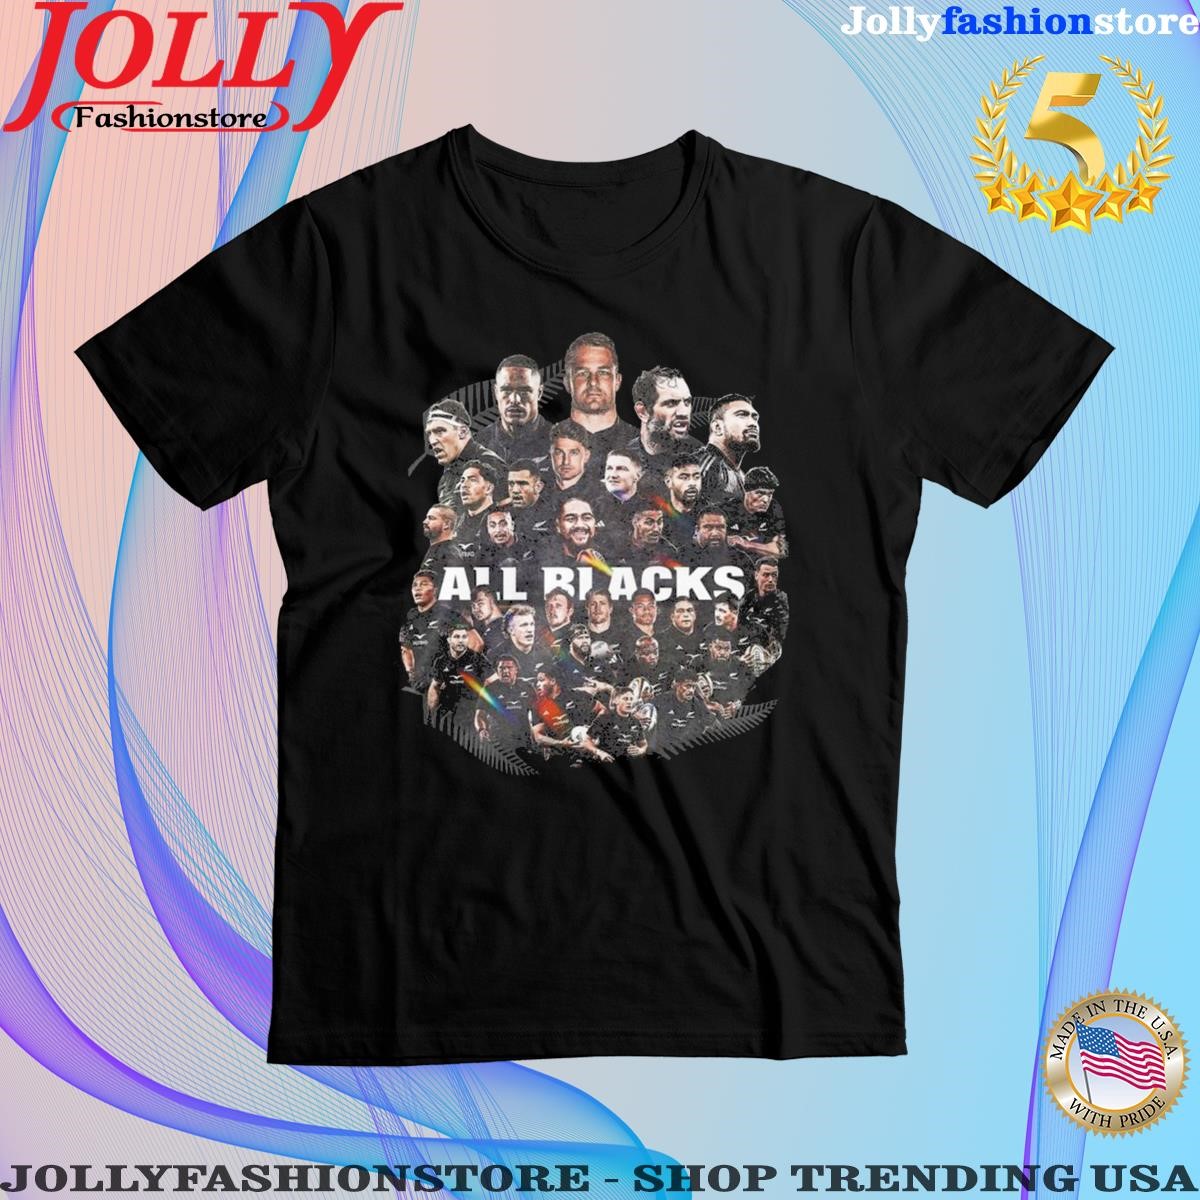 Trending 2023 All Blacks rugby team of New Zealand T-Shirt